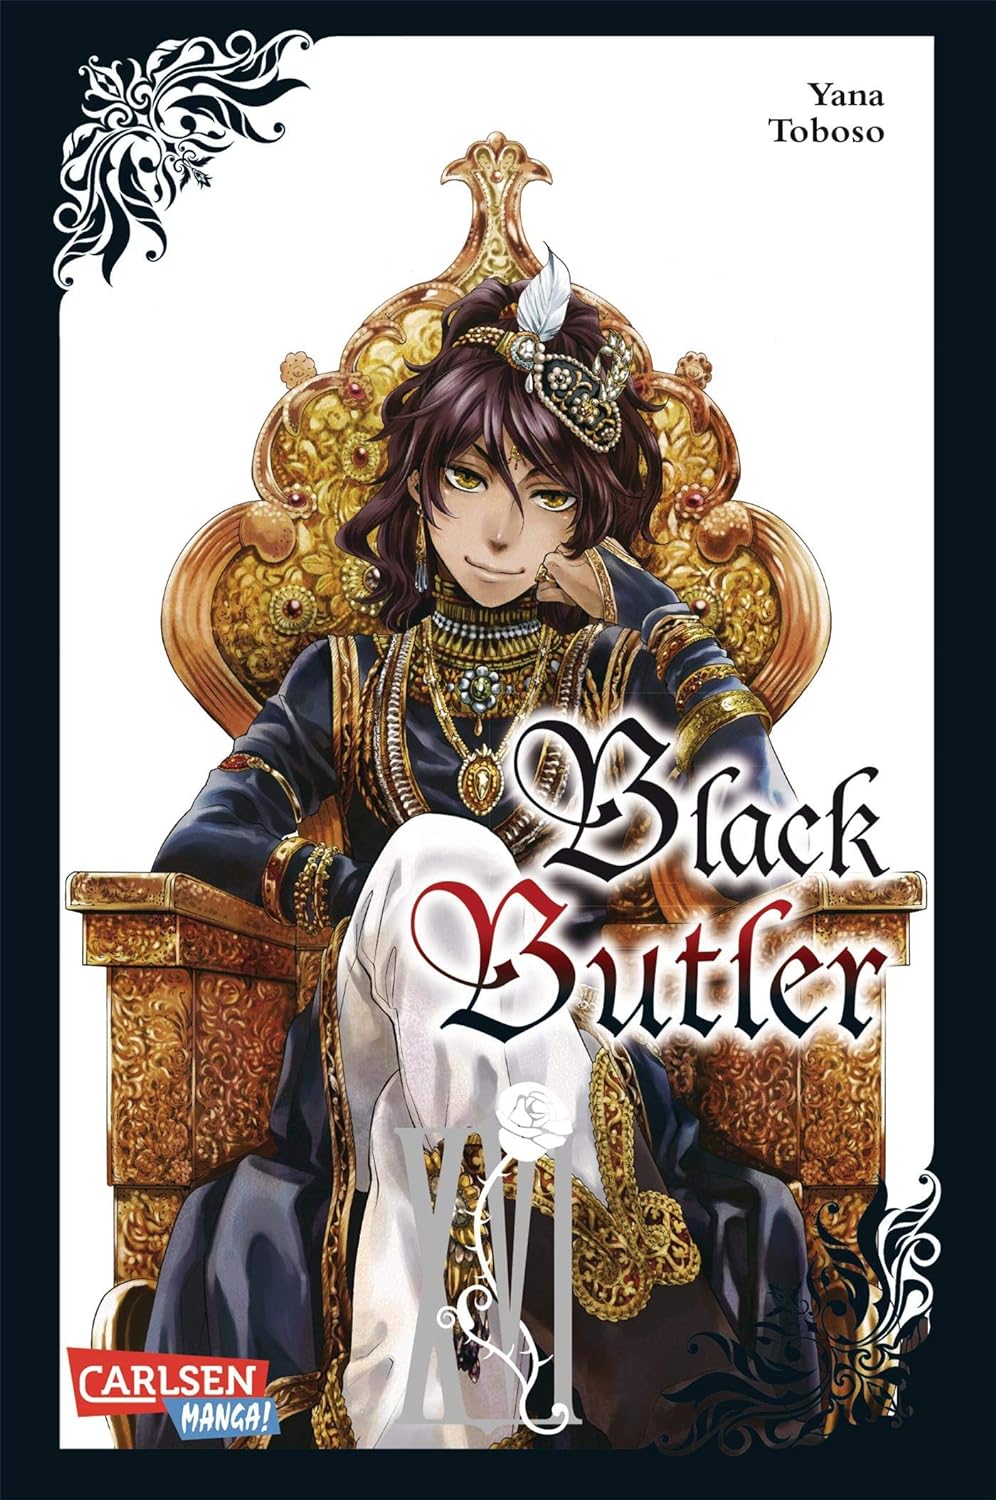 Cover image of the Manga Black Butler, Vol. 16